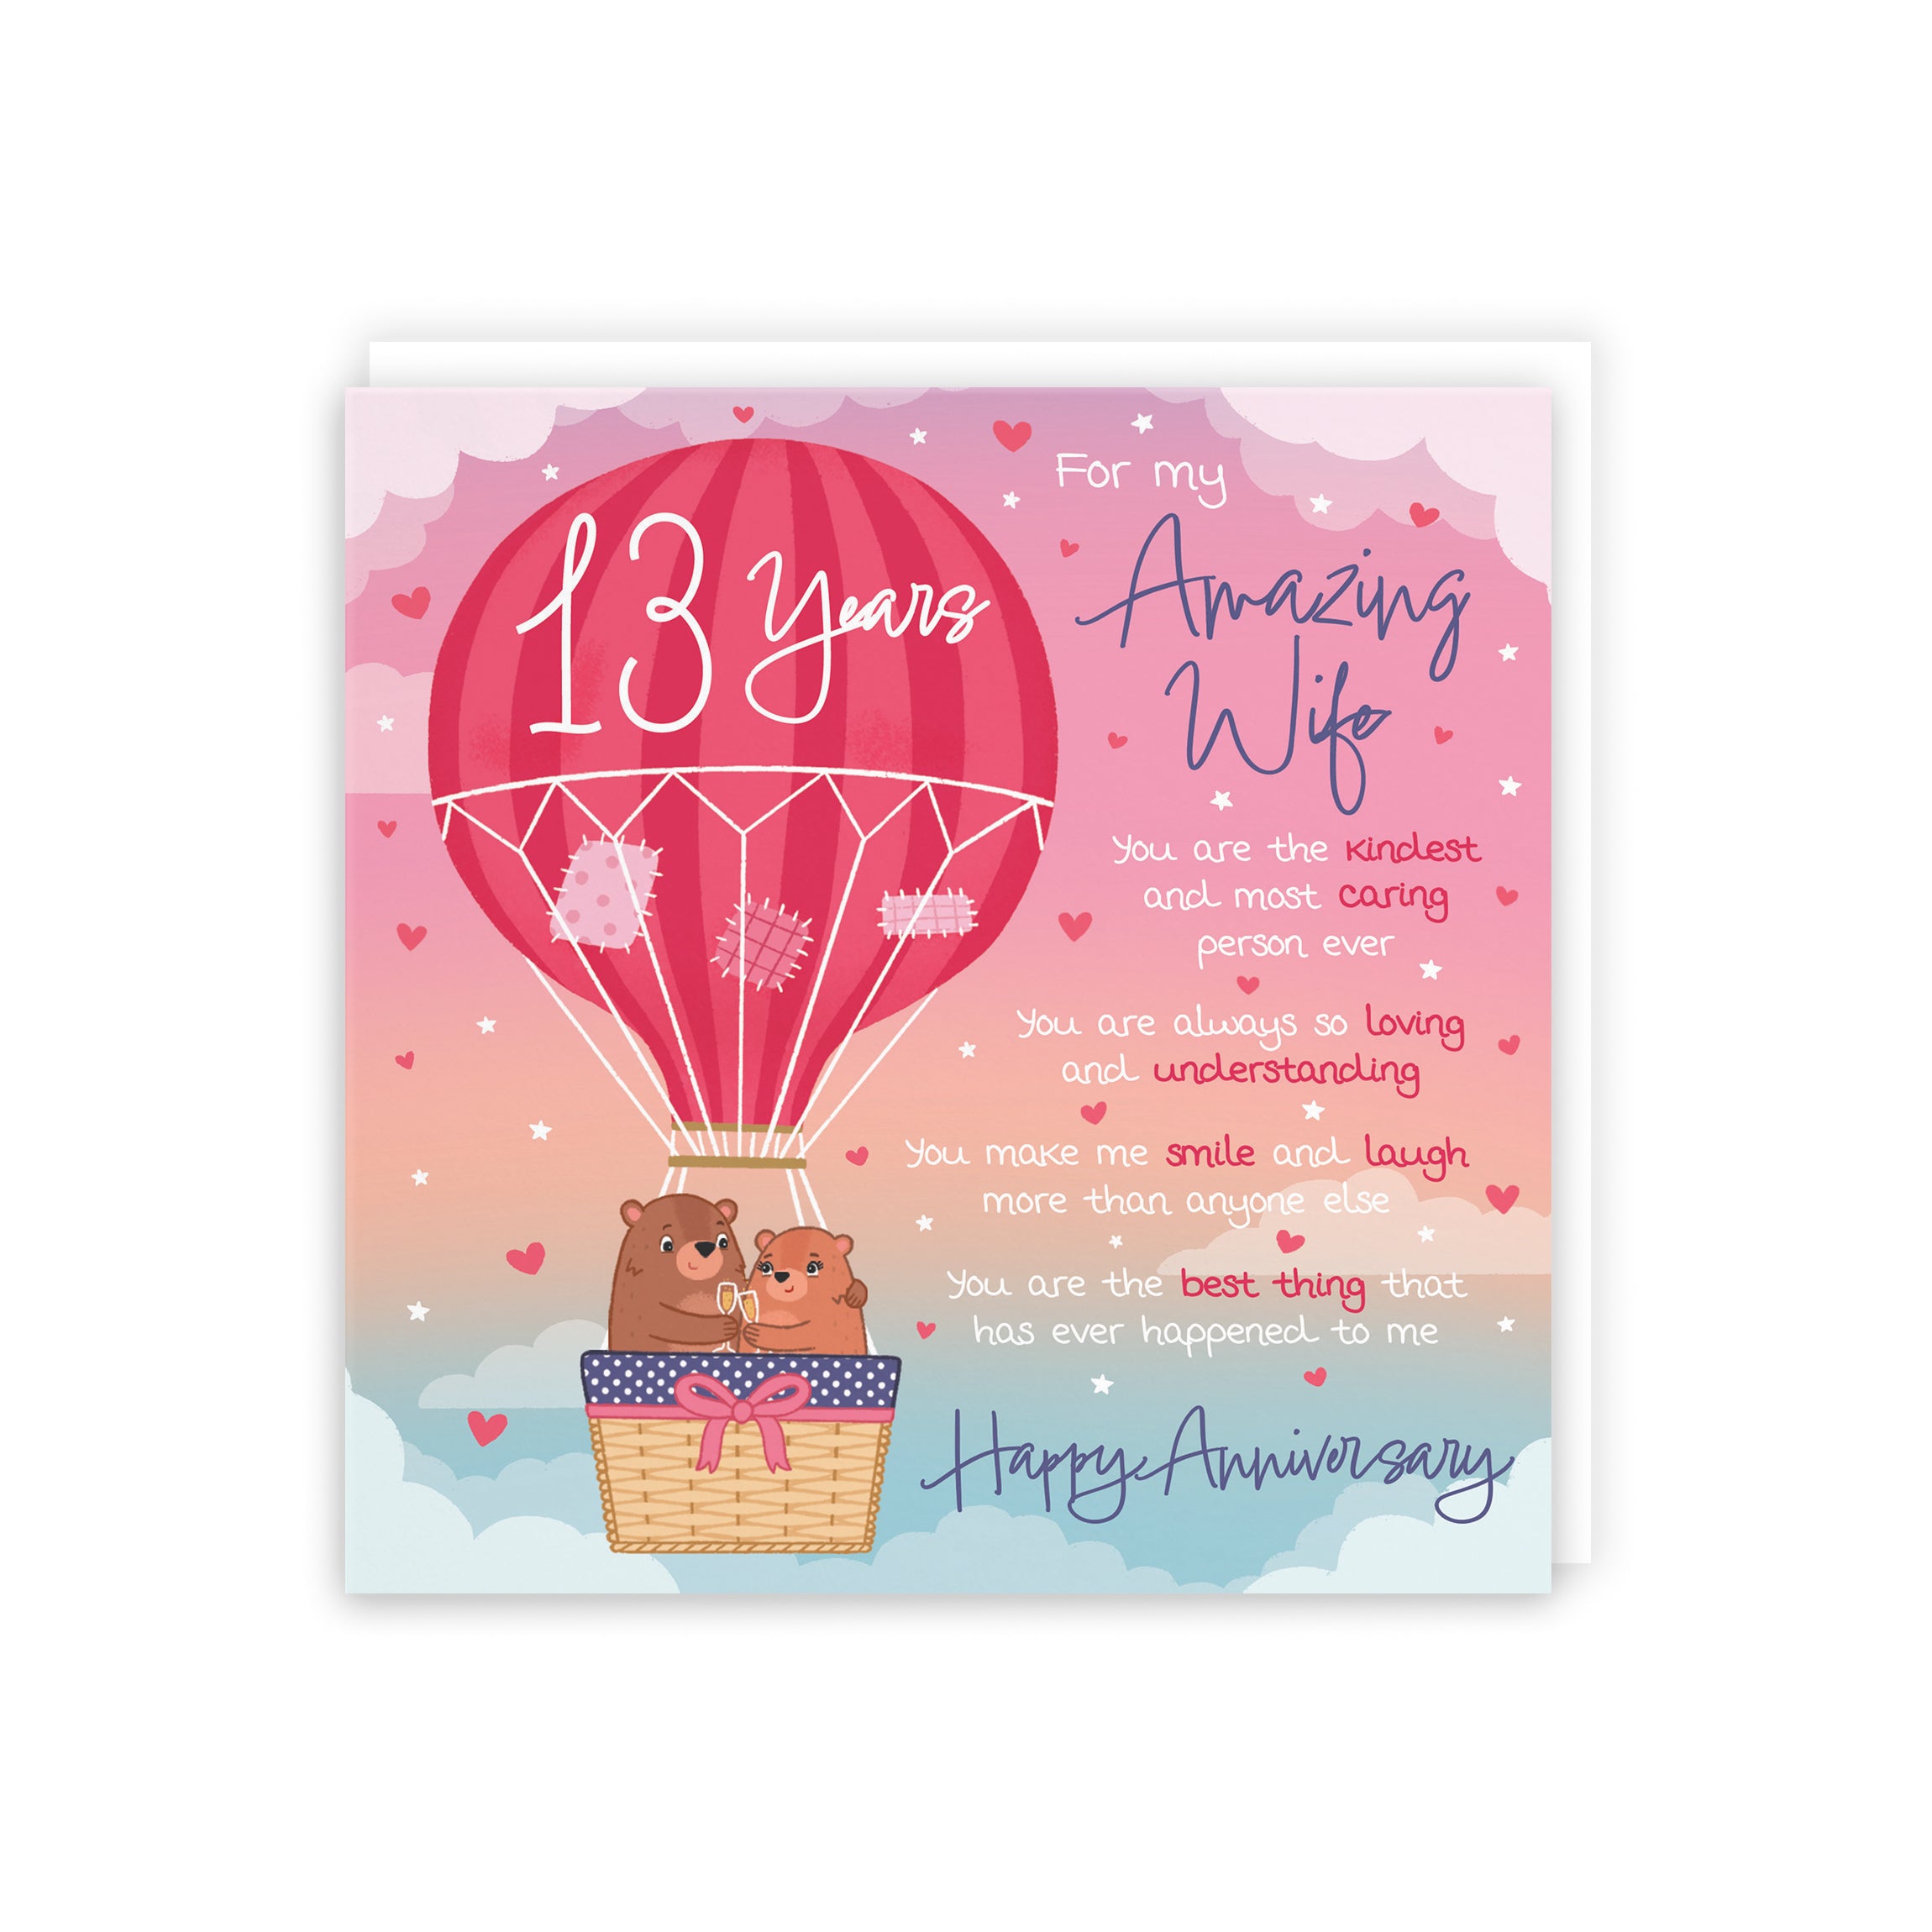 Wife 13th Anniversary Poem Card Love Is In The Air Cute Bears